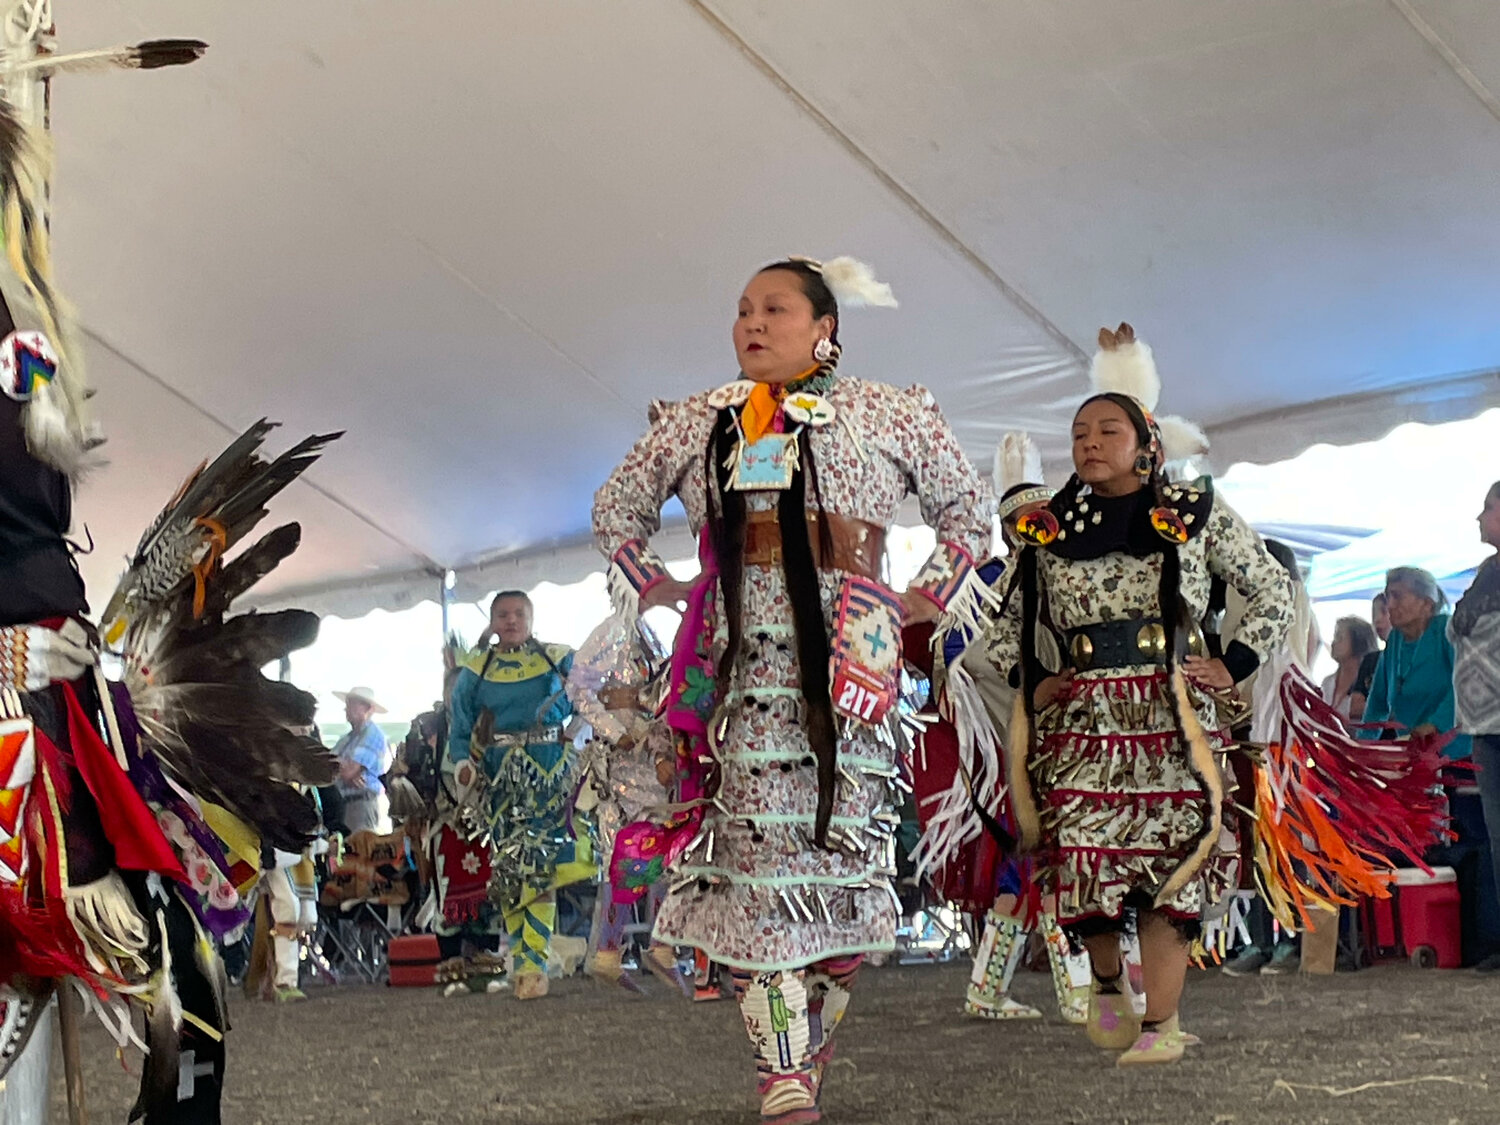 The grand entry of the powwow is the most colorful events at the county fair each year.